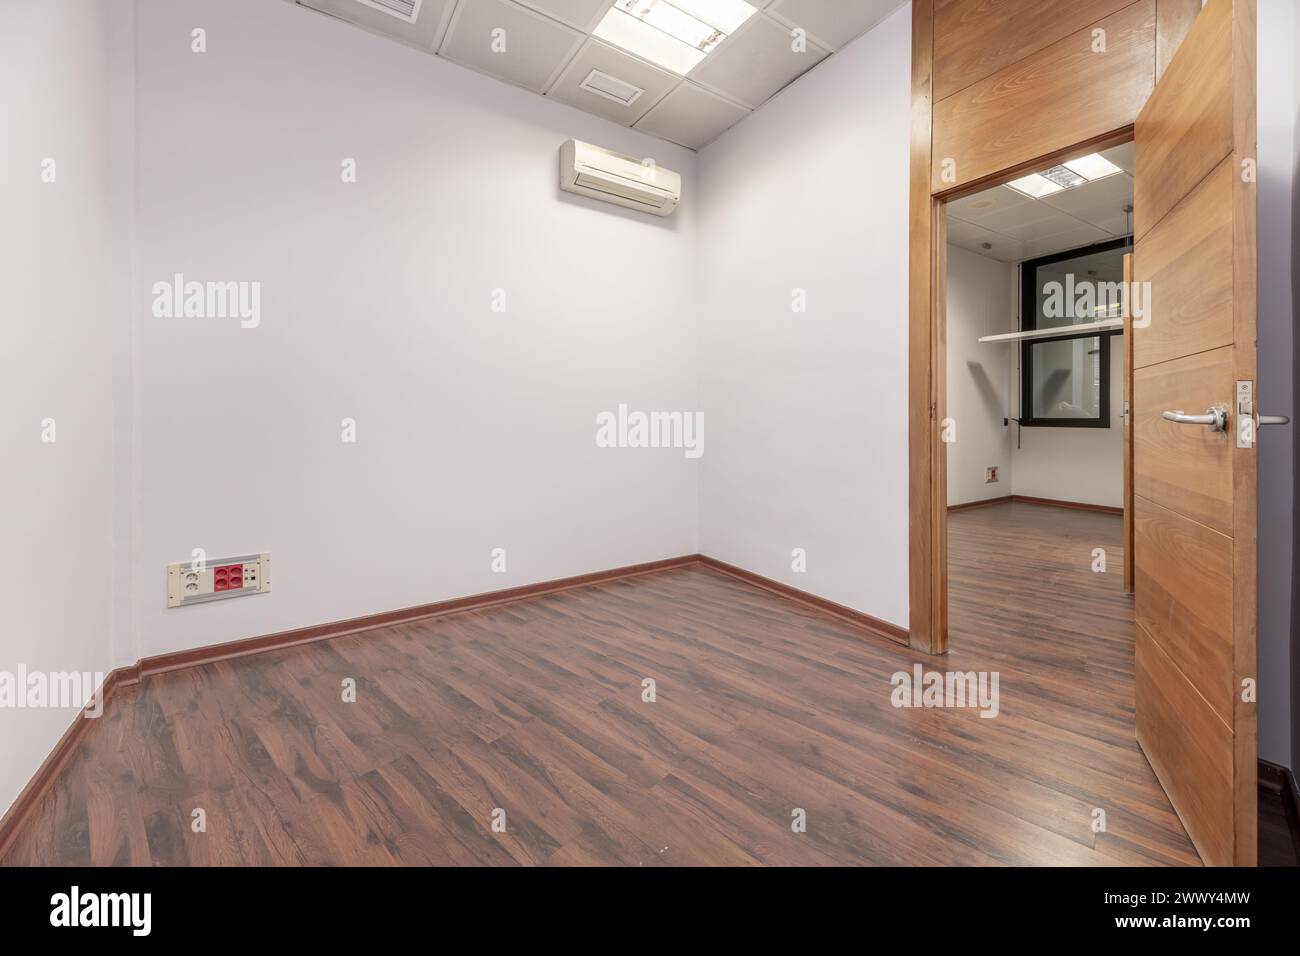 An empty office with plain white painted walls, reddish parquet floors and technical ceilings Stock Photo